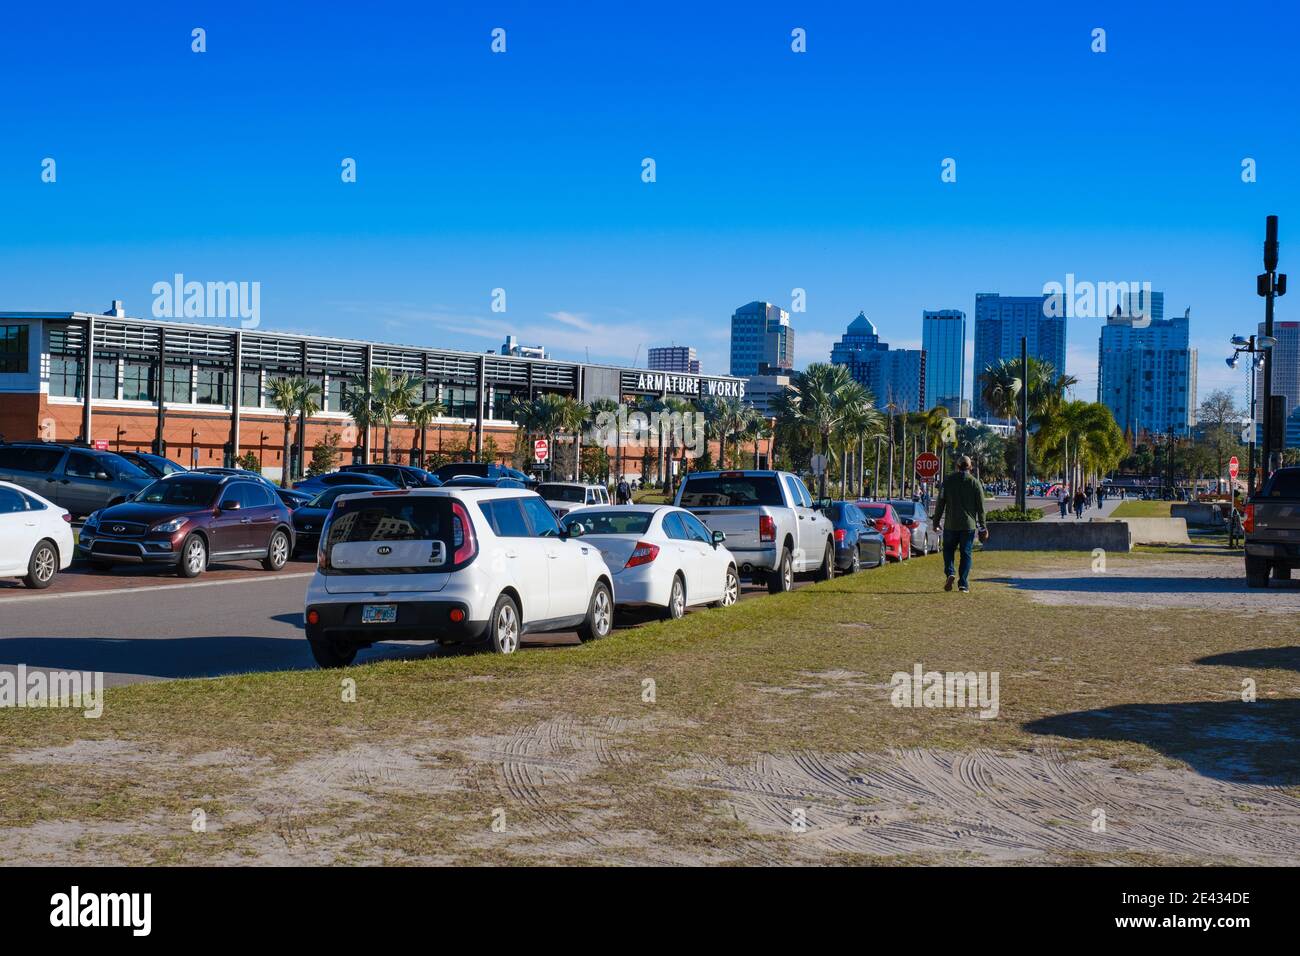 Armature works - Tampa Heights, Tampa, Florida. Tampa's first suburb established in 1883. The Tampa Heights neighborhood has been experiencing gentrif Stock Photo